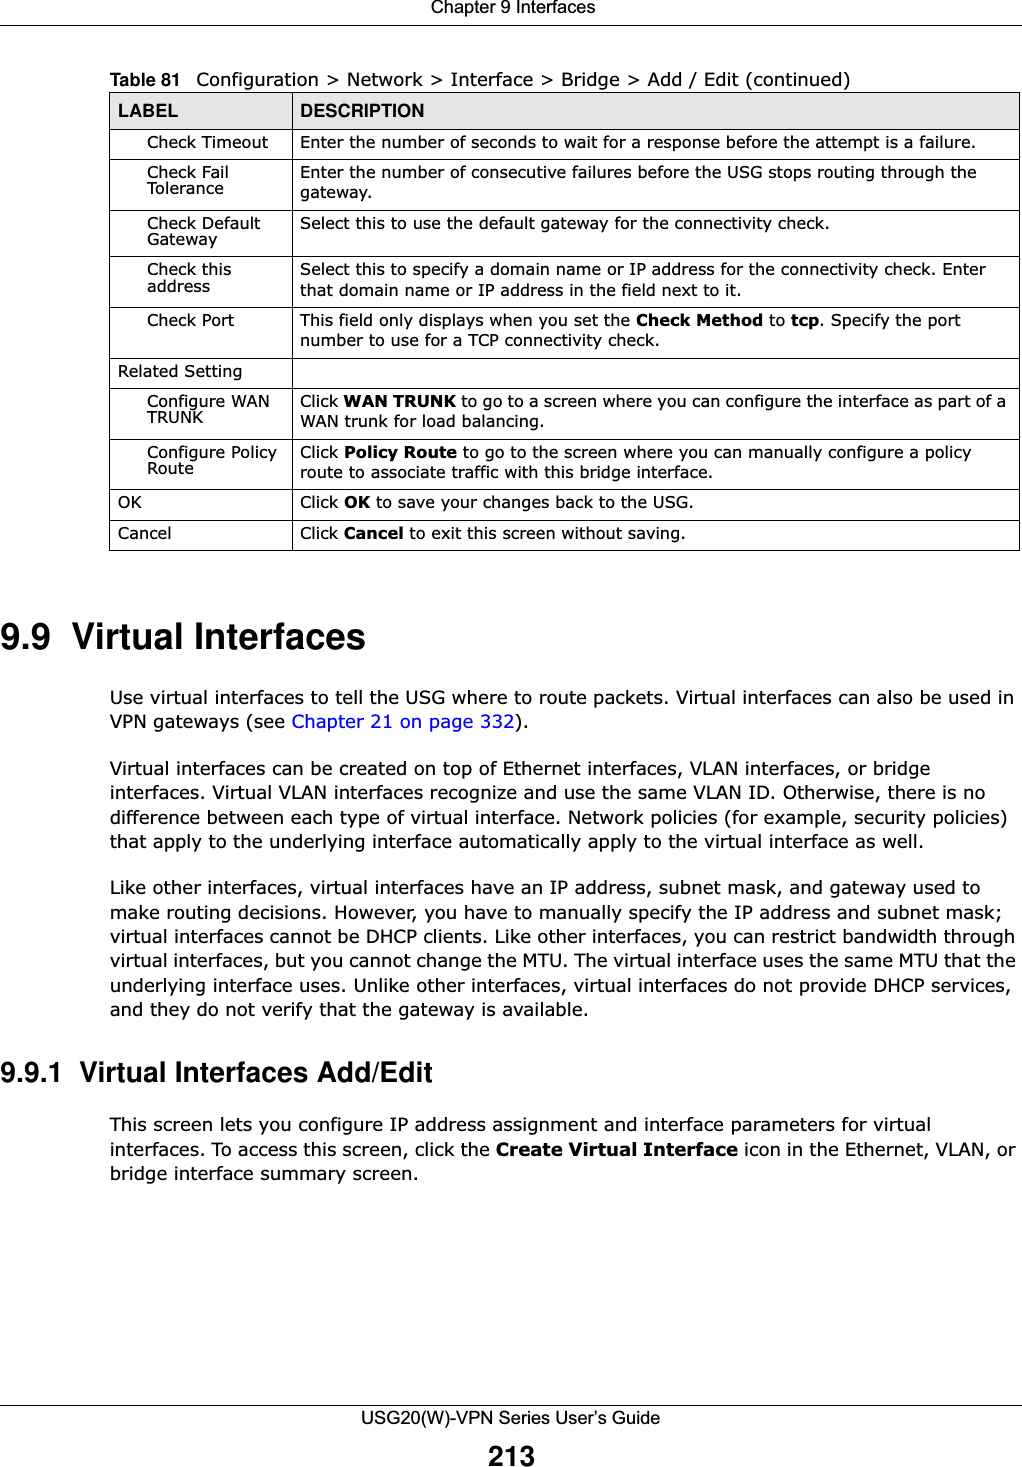  Chapter 9 InterfacesUSG20(W)-VPN Series User’s Guide2139.9  Virtual Interfaces Use virtual interfaces to tell the USG where to route packets. Virtual interfaces can also be used in VPN gateways (see Chapter 21 on page 332).Virtual interfaces can be created on top of Ethernet interfaces, VLAN interfaces, or bridge interfaces. Virtual VLAN interfaces recognize and use the same VLAN ID. Otherwise, there is no difference between each type of virtual interface. Network policies (for example, security policies) that apply to the underlying interface automatically apply to the virtual interface as well.Like other interfaces, virtual interfaces have an IP address, subnet mask, and gateway used to make routing decisions. However, you have to manually specify the IP address and subnet mask; virtual interfaces cannot be DHCP clients. Like other interfaces, you can restrict bandwidth through virtual interfaces, but you cannot change the MTU. The virtual interface uses the same MTU that the underlying interface uses. Unlike other interfaces, virtual interfaces do not provide DHCP services, and they do not verify that the gateway is available.9.9.1  Virtual Interfaces Add/EditThis screen lets you configure IP address assignment and interface parameters for virtual interfaces. To access this screen, click the Create Virtual Interface icon in the Ethernet, VLAN, or bridge interface summary screen.Check Timeout Enter the number of seconds to wait for a response before the attempt is a failure.Check Fail Tolerance Enter the number of consecutive failures before the USG stops routing through the gateway.Check Default Gateway Select this to use the default gateway for the connectivity check.Check this address Select this to specify a domain name or IP address for the connectivity check. Enter that domain name or IP address in the field next to it.Check Port This field only displays when you set the Check Method to tcp. Specify the port number to use for a TCP connectivity check.Related SettingConfigure WAN TRUNK  Click WAN TRUNK to go to a screen where you can configure the interface as part of a WAN trunk for load balancing.Configure Policy Route Click Policy Route to go to the screen where you can manually configure a policy route to associate traffic with this bridge interface.OK Click OK to save your changes back to the USG.Cancel Click Cancel to exit this screen without saving.Table 81   Configuration &gt; Network &gt; Interface &gt; Bridge &gt; Add / Edit (continued)LABEL DESCRIPTION